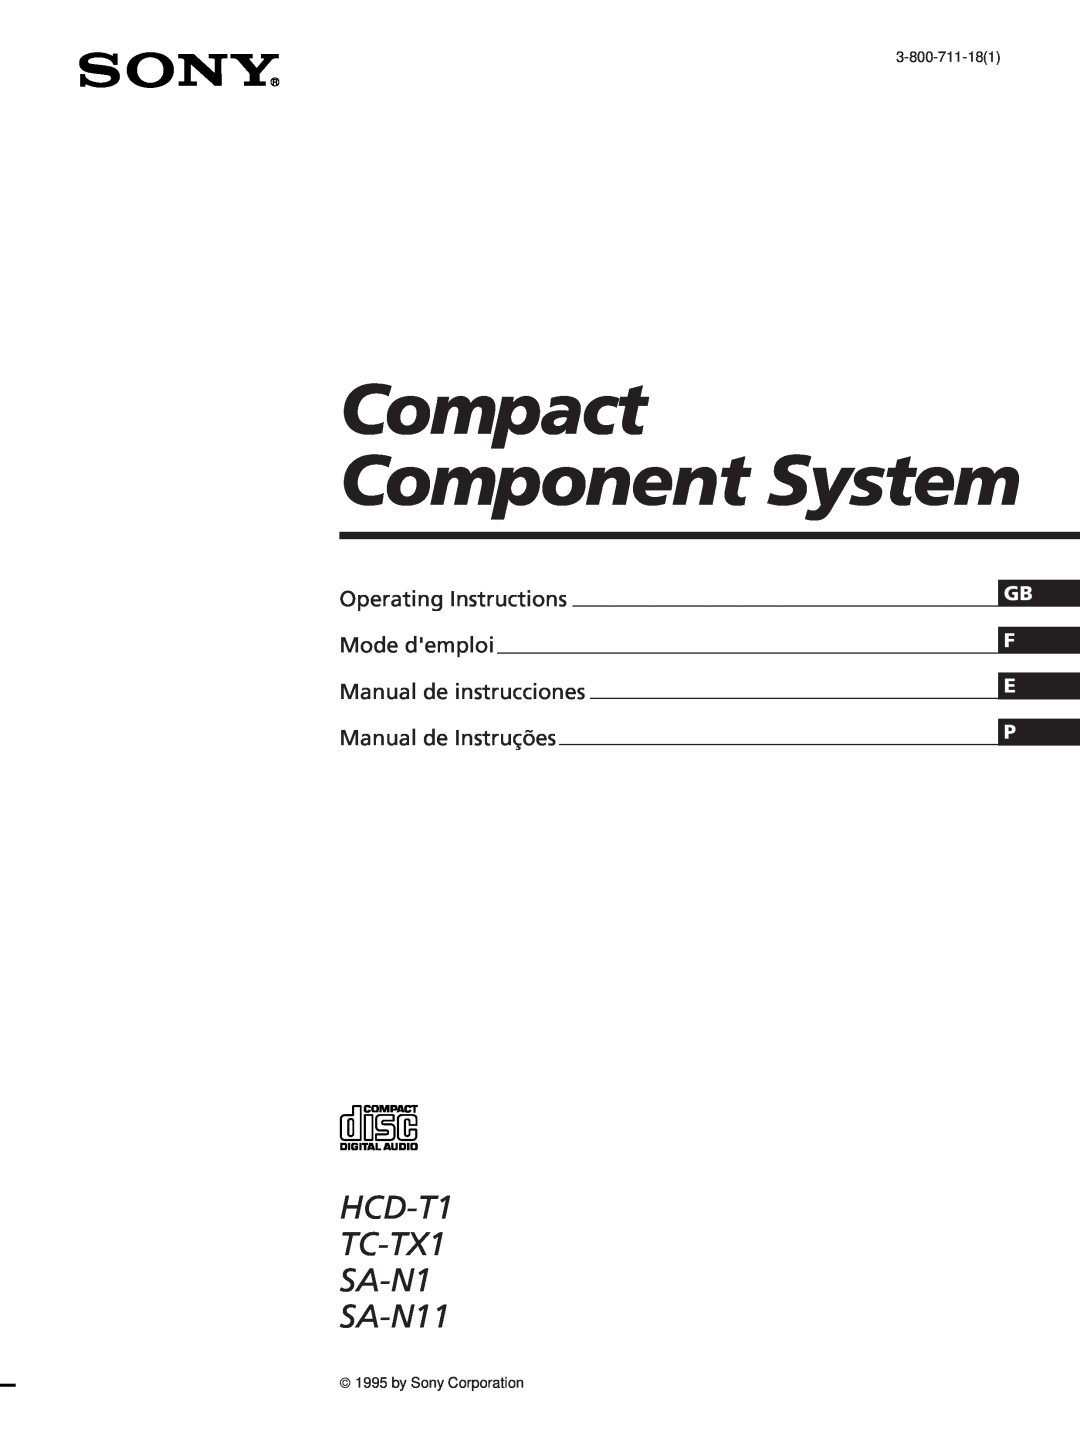 Sony manual Compact Component System, HCD-T1 TC-TX1 SA-N1 SA-N11, Operating Instructions, Mode demploi, 3-800-711-181 